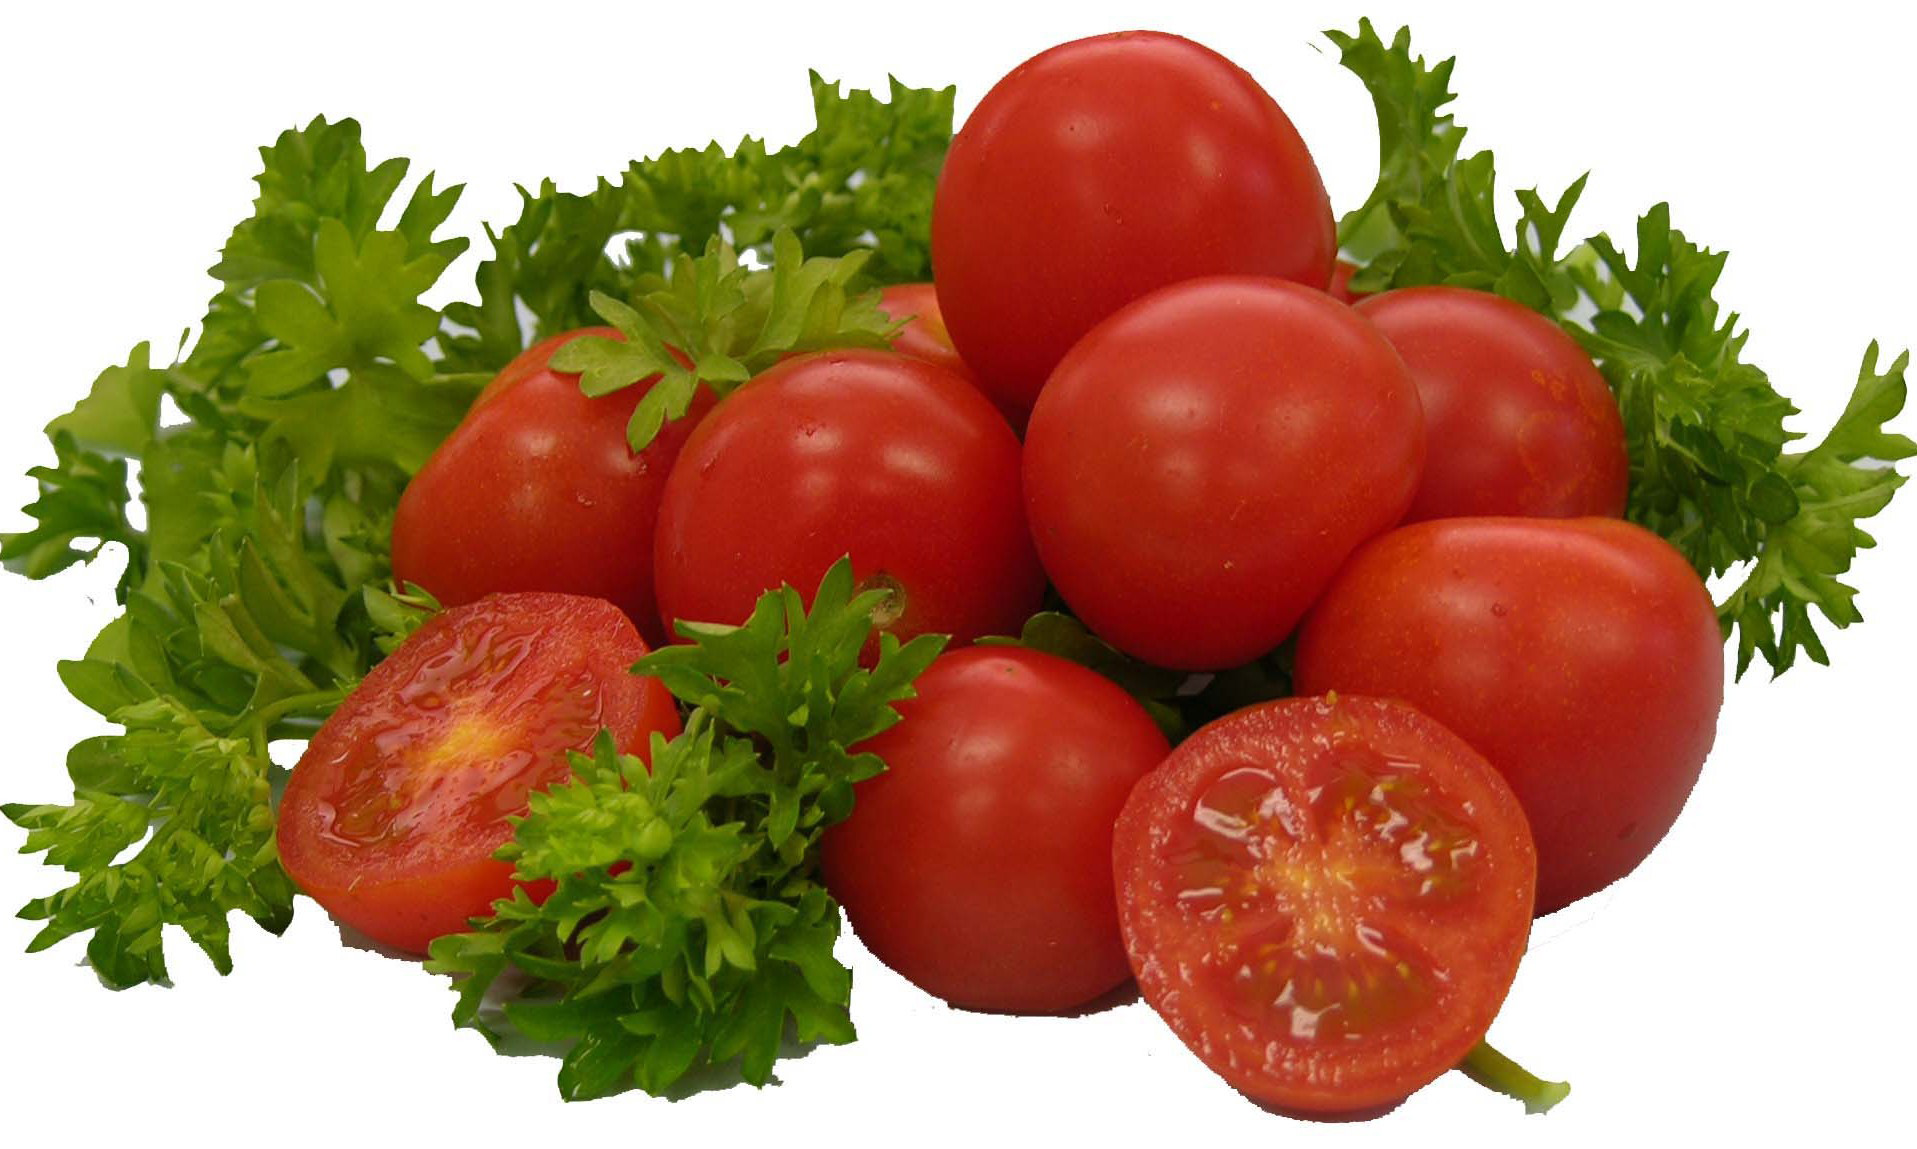 Red tomatoes photo